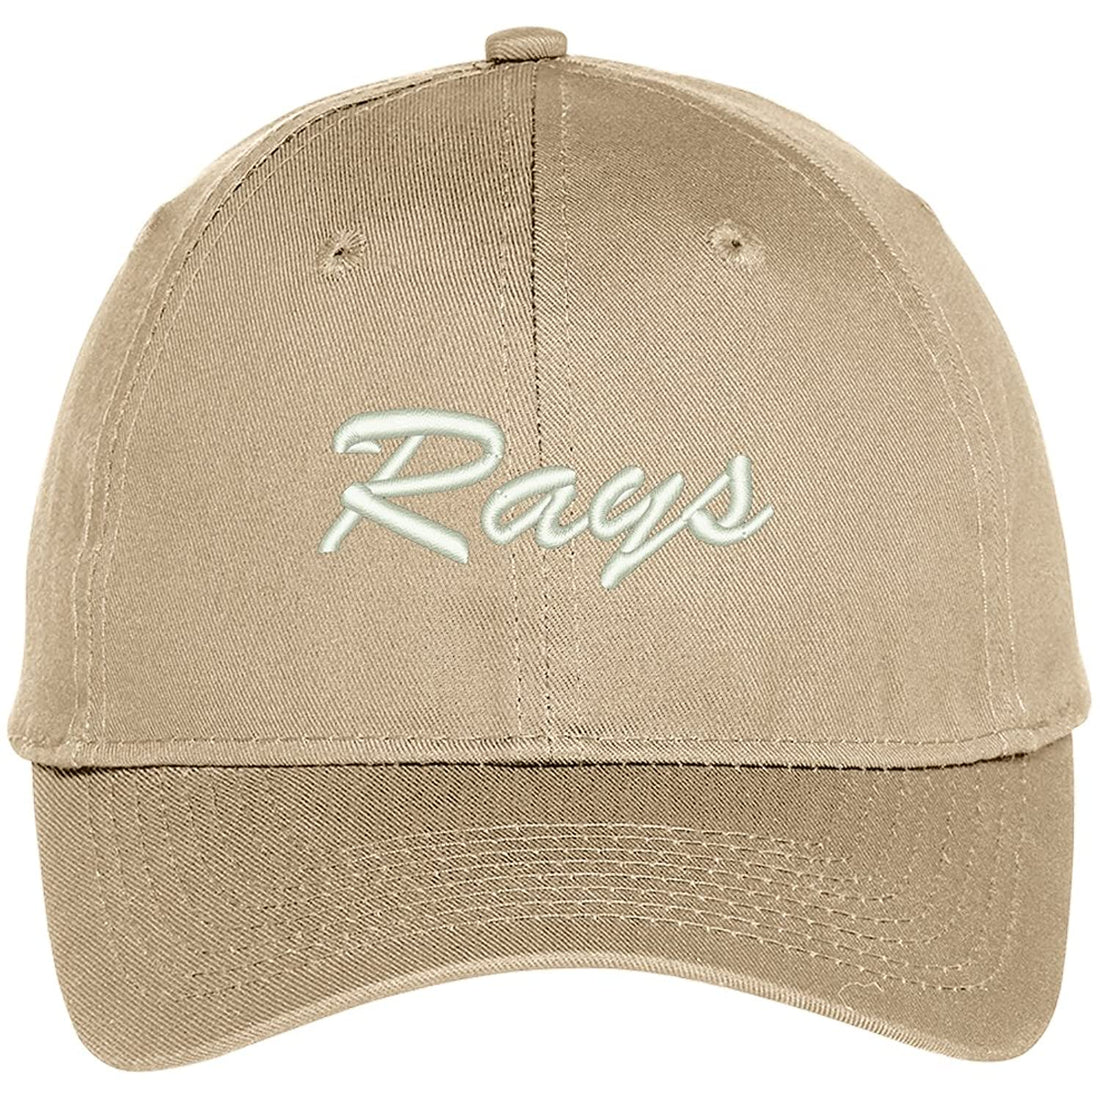 Trendy Apparel Shop Rays Embroidered Precurved Adjustable Cap